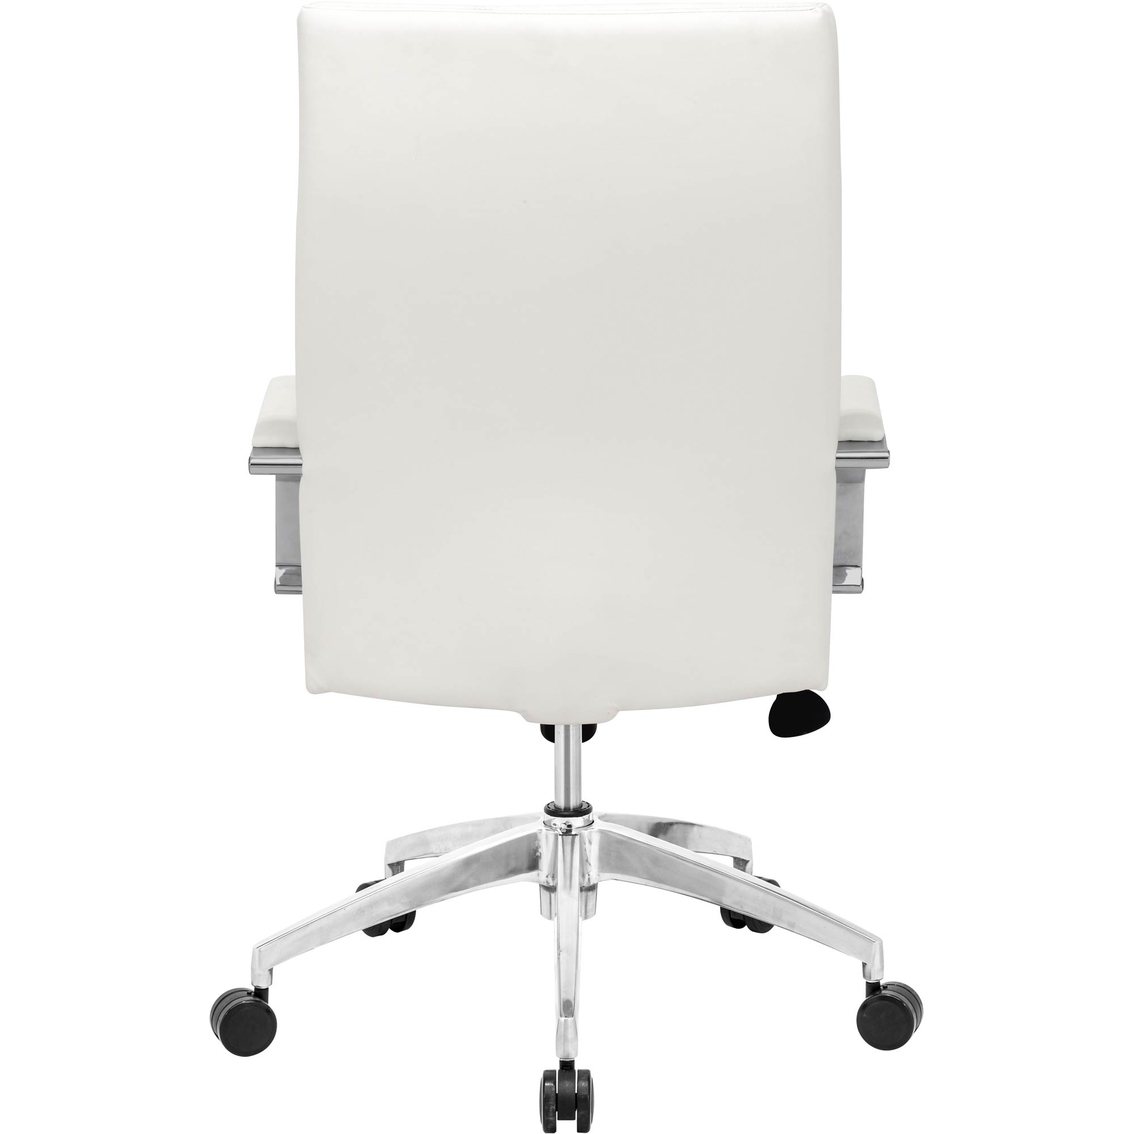 Zuo Director Comfort Office Chair - Image 2 of 4